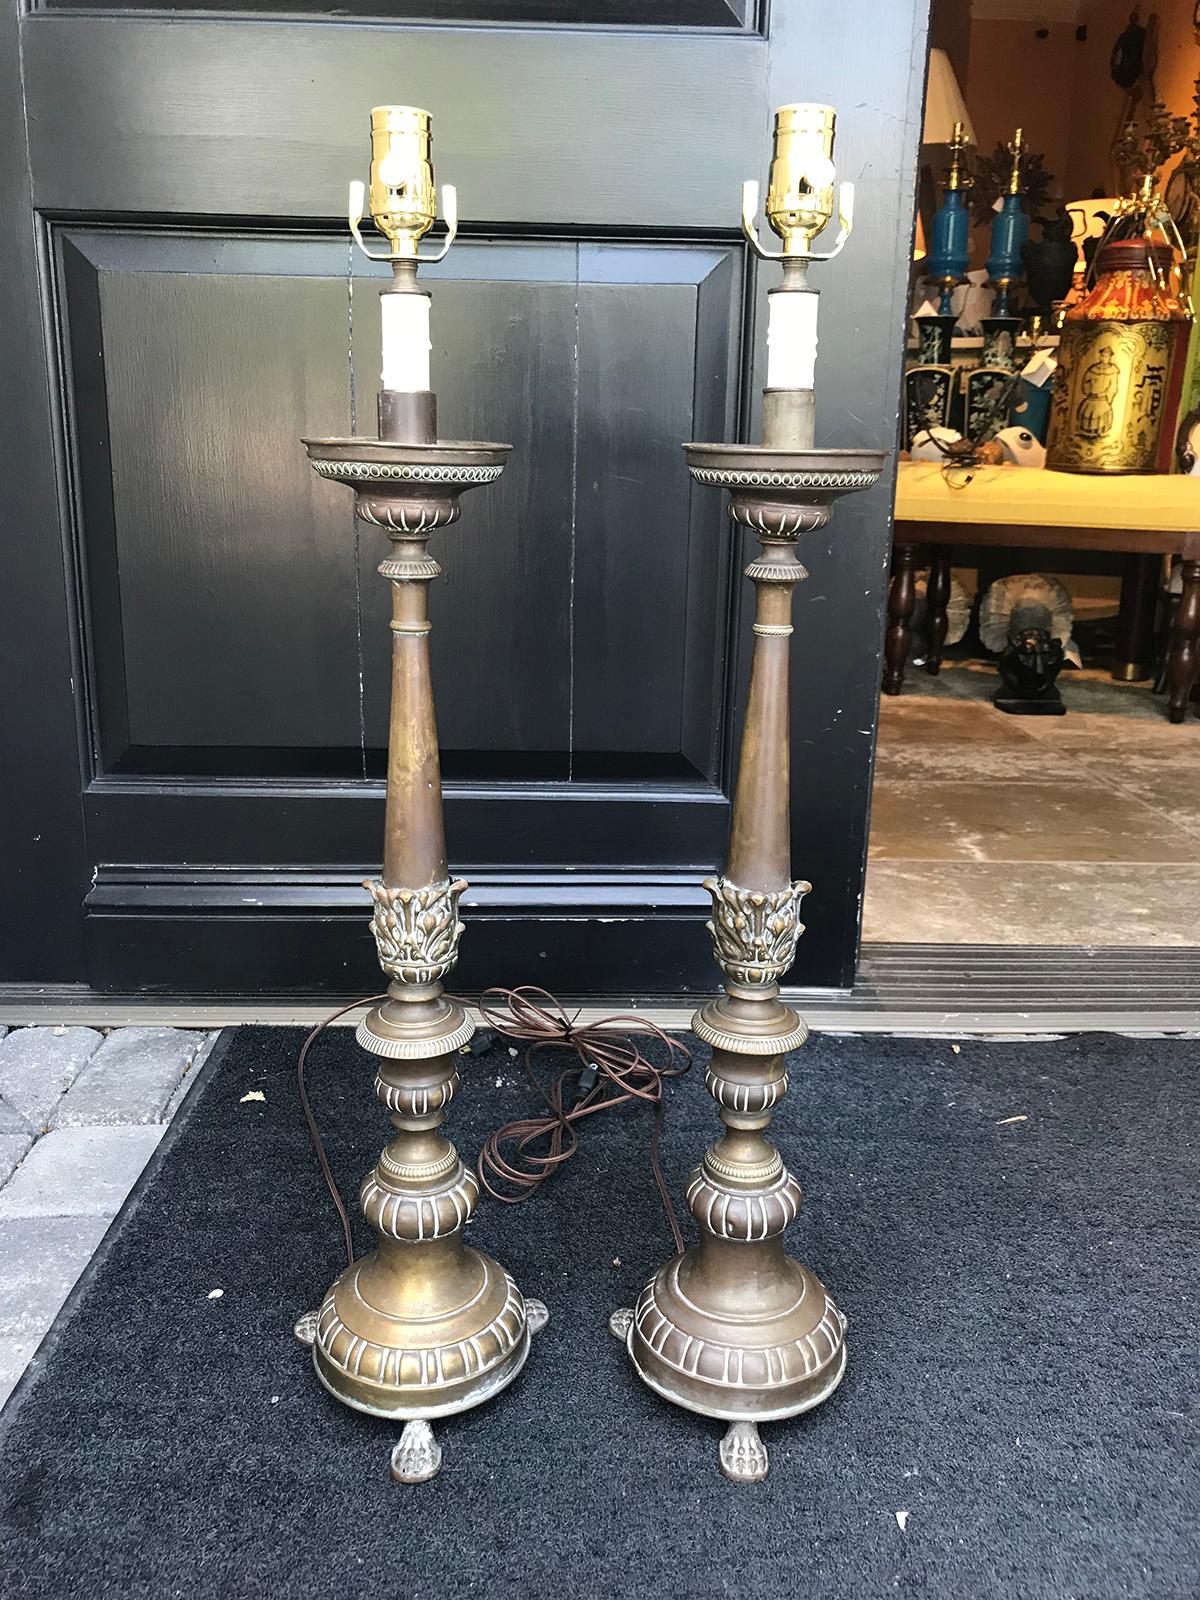 Pair of late 19th-early 20th century brass candlesticks as lamps
New wiring.